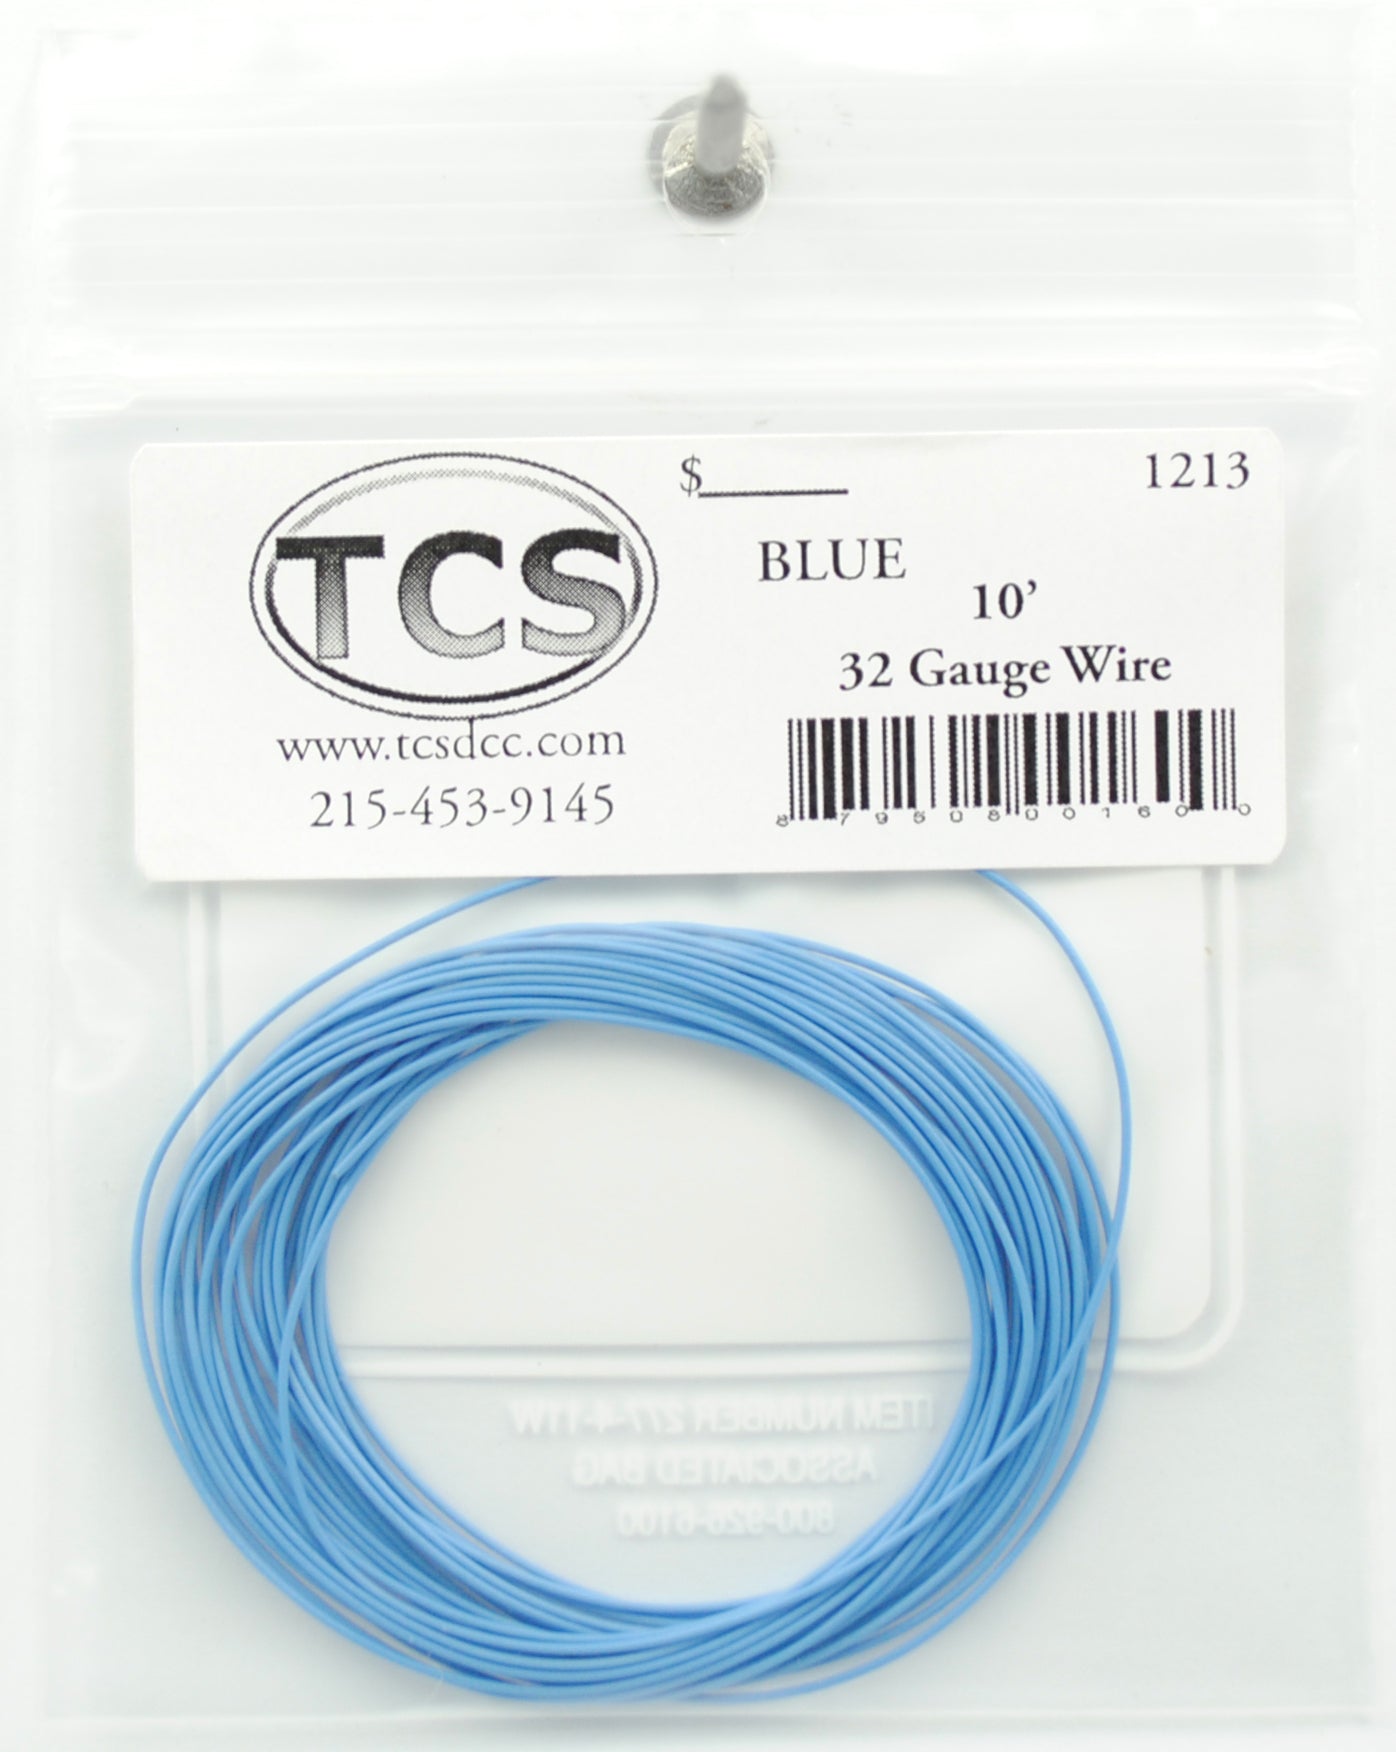 Train Control Systems 1213 10' of 32 Gauge Wire, Blue